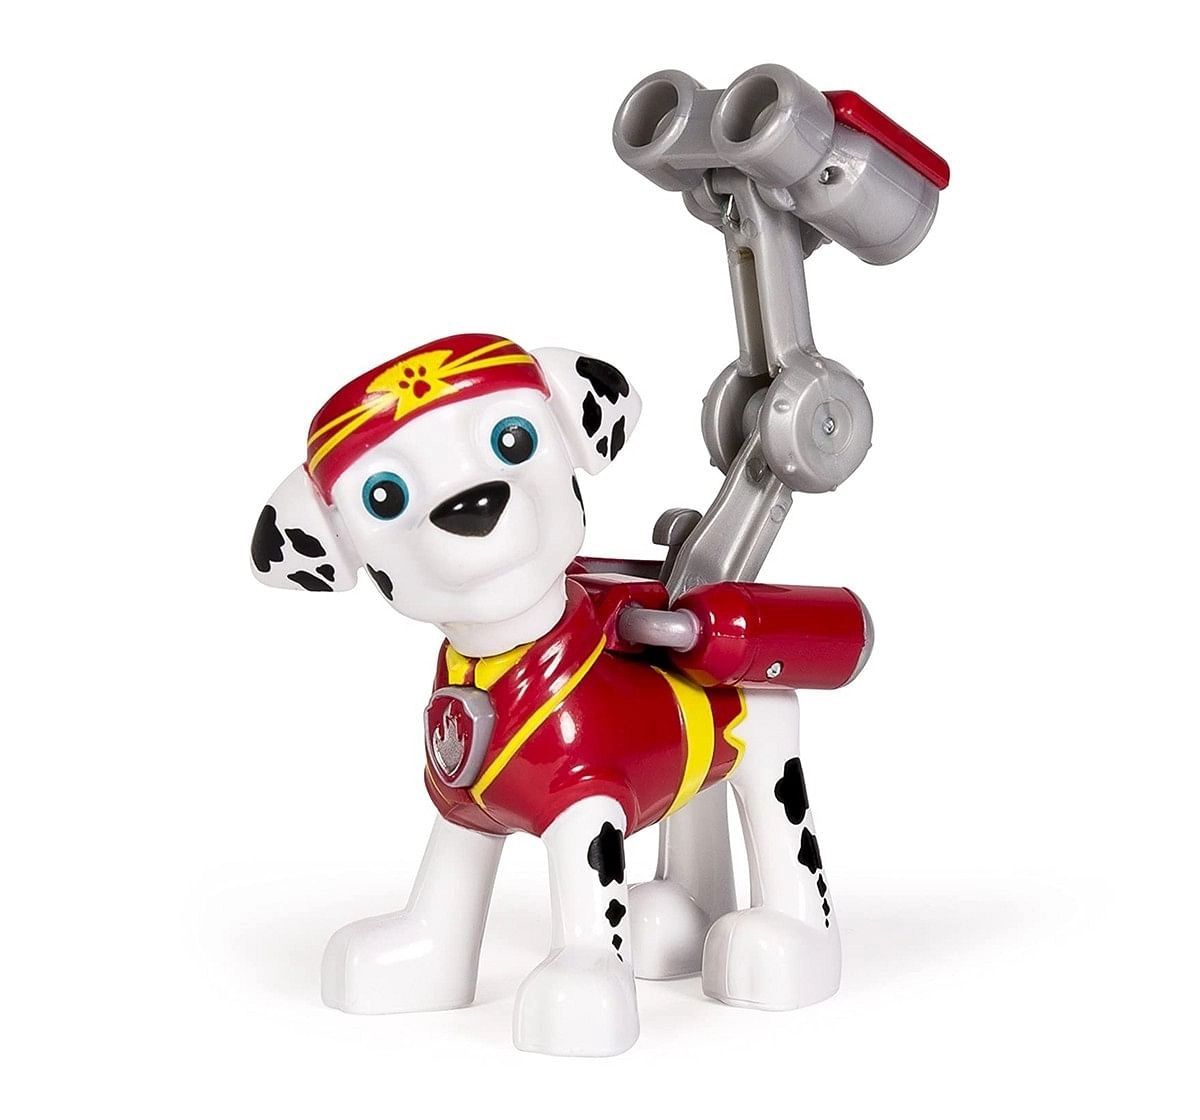 Paw Patrol Hero Pup FigureAssorted Activity Toys for Kids age 3Y+ 